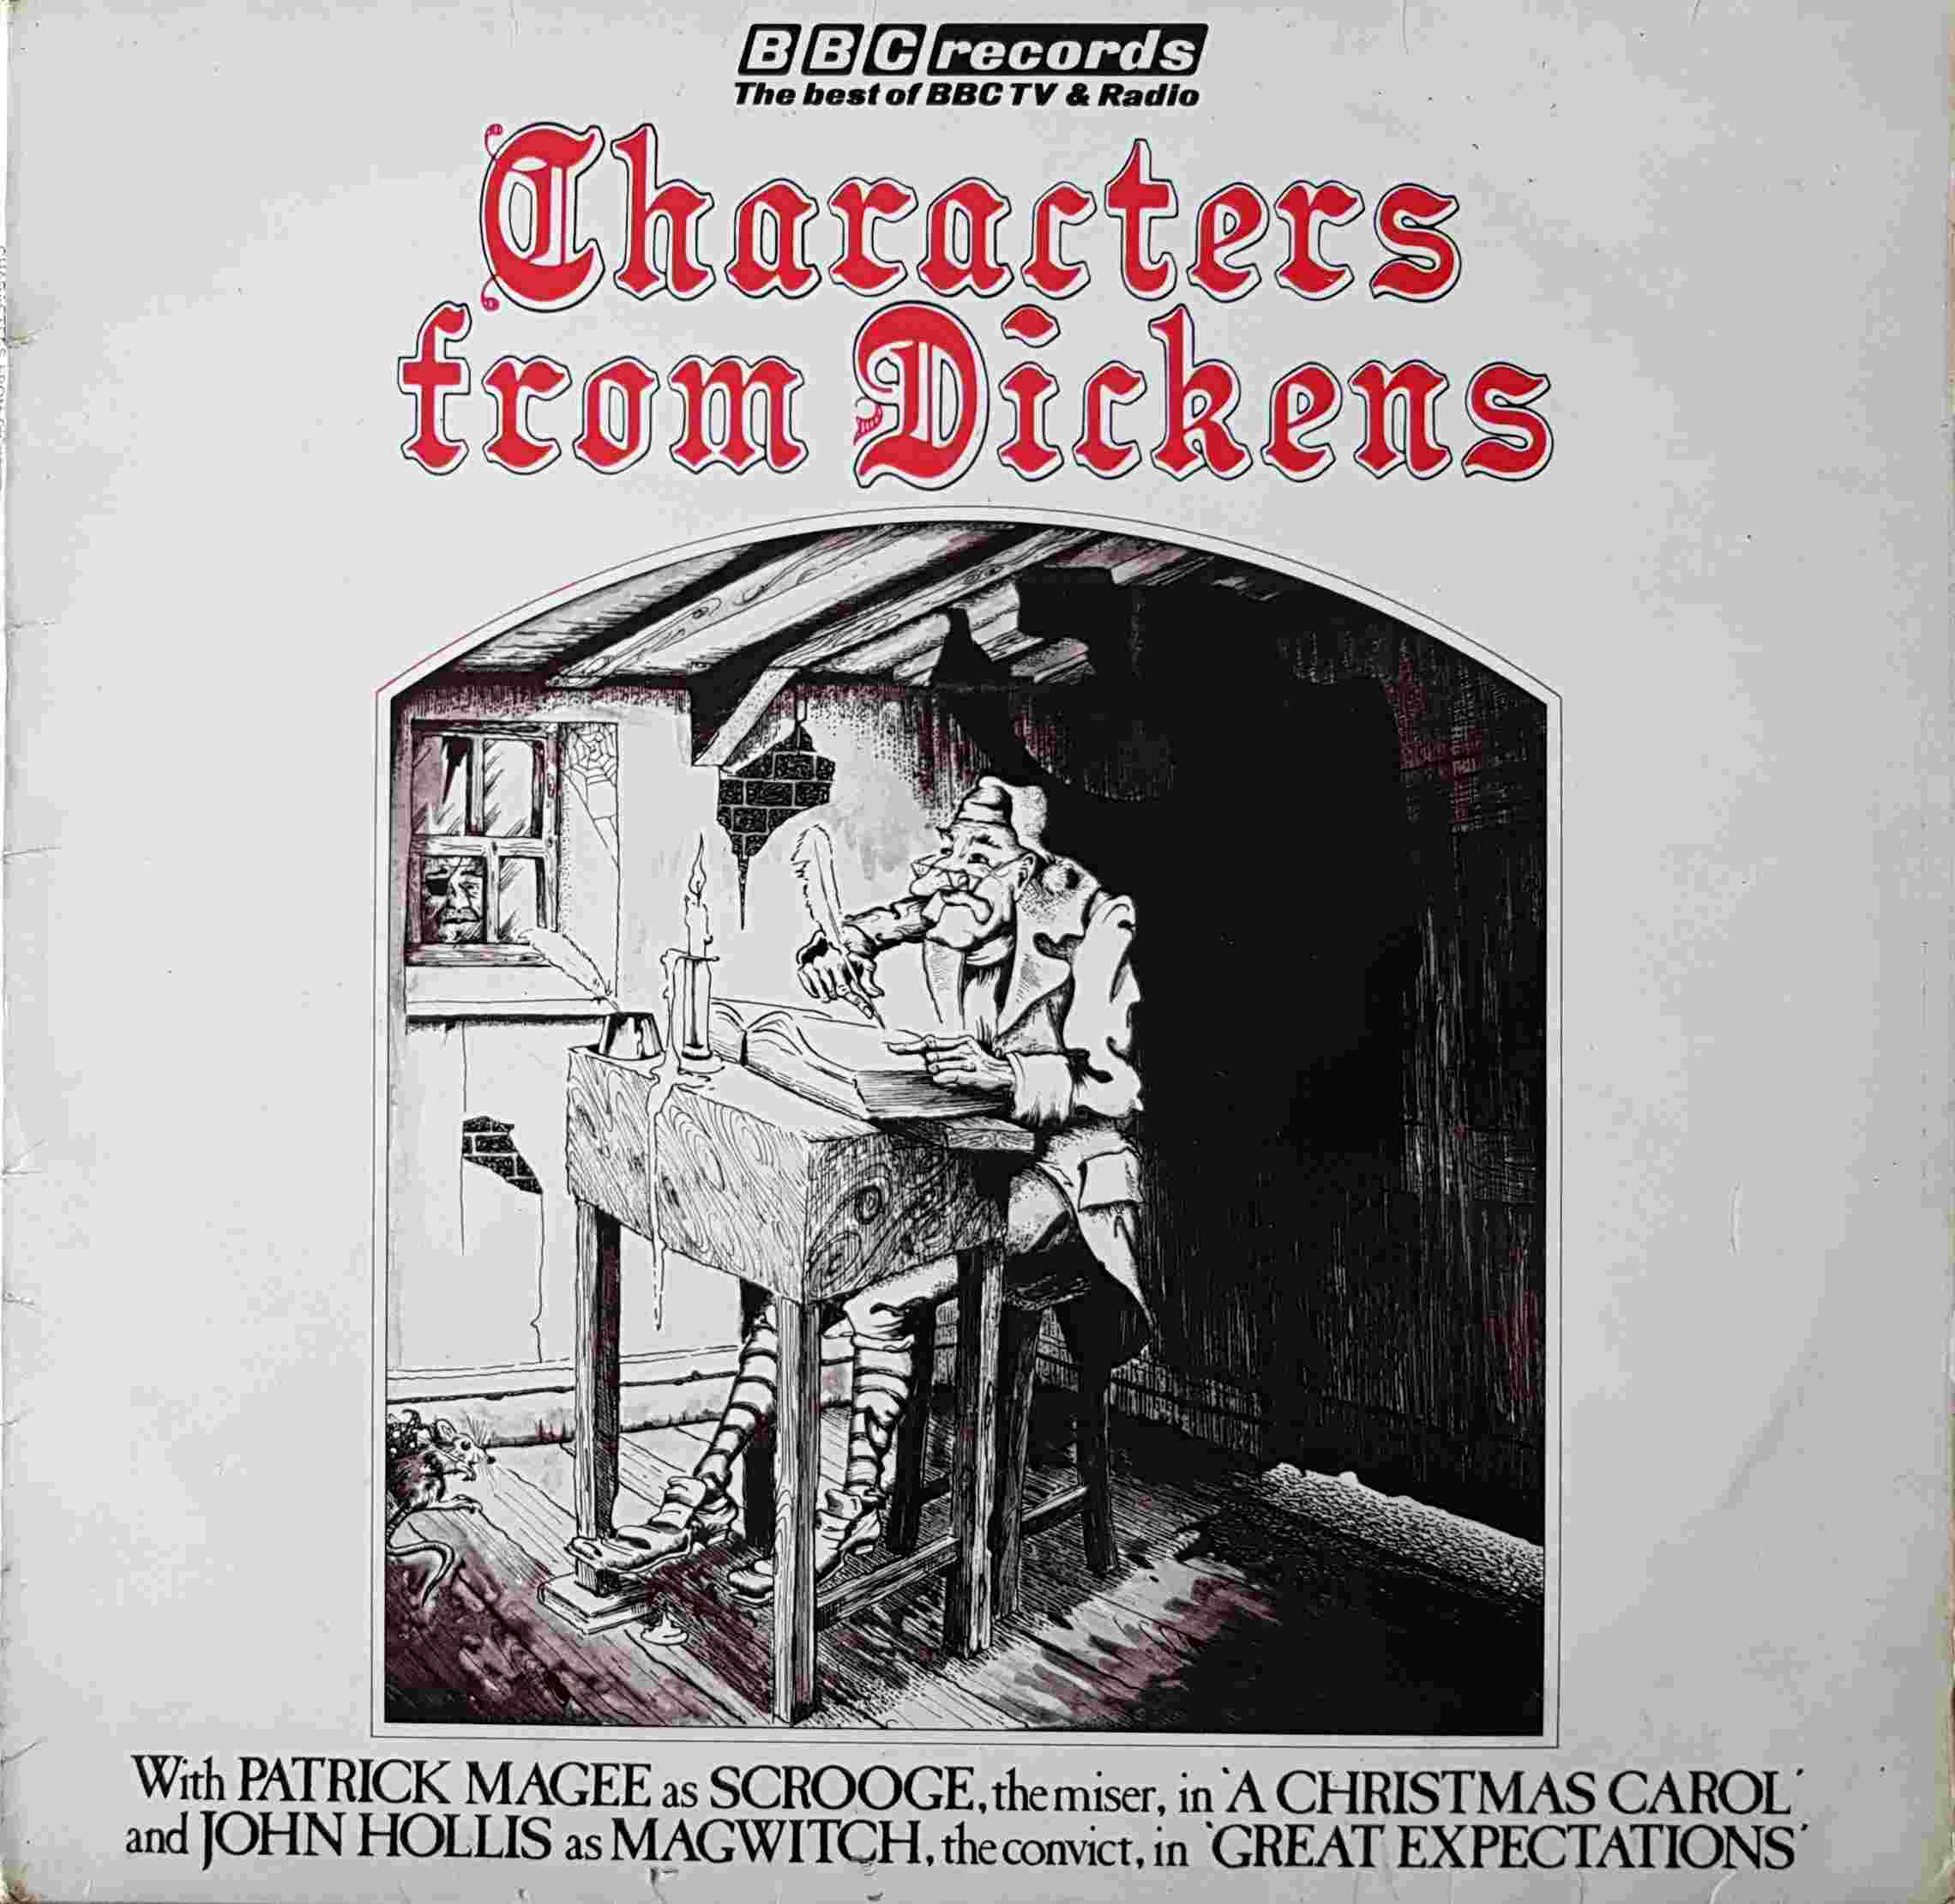 Picture of REC 186 Characters from Dickens by artist Dickens from the BBC albums - Records and Tapes library